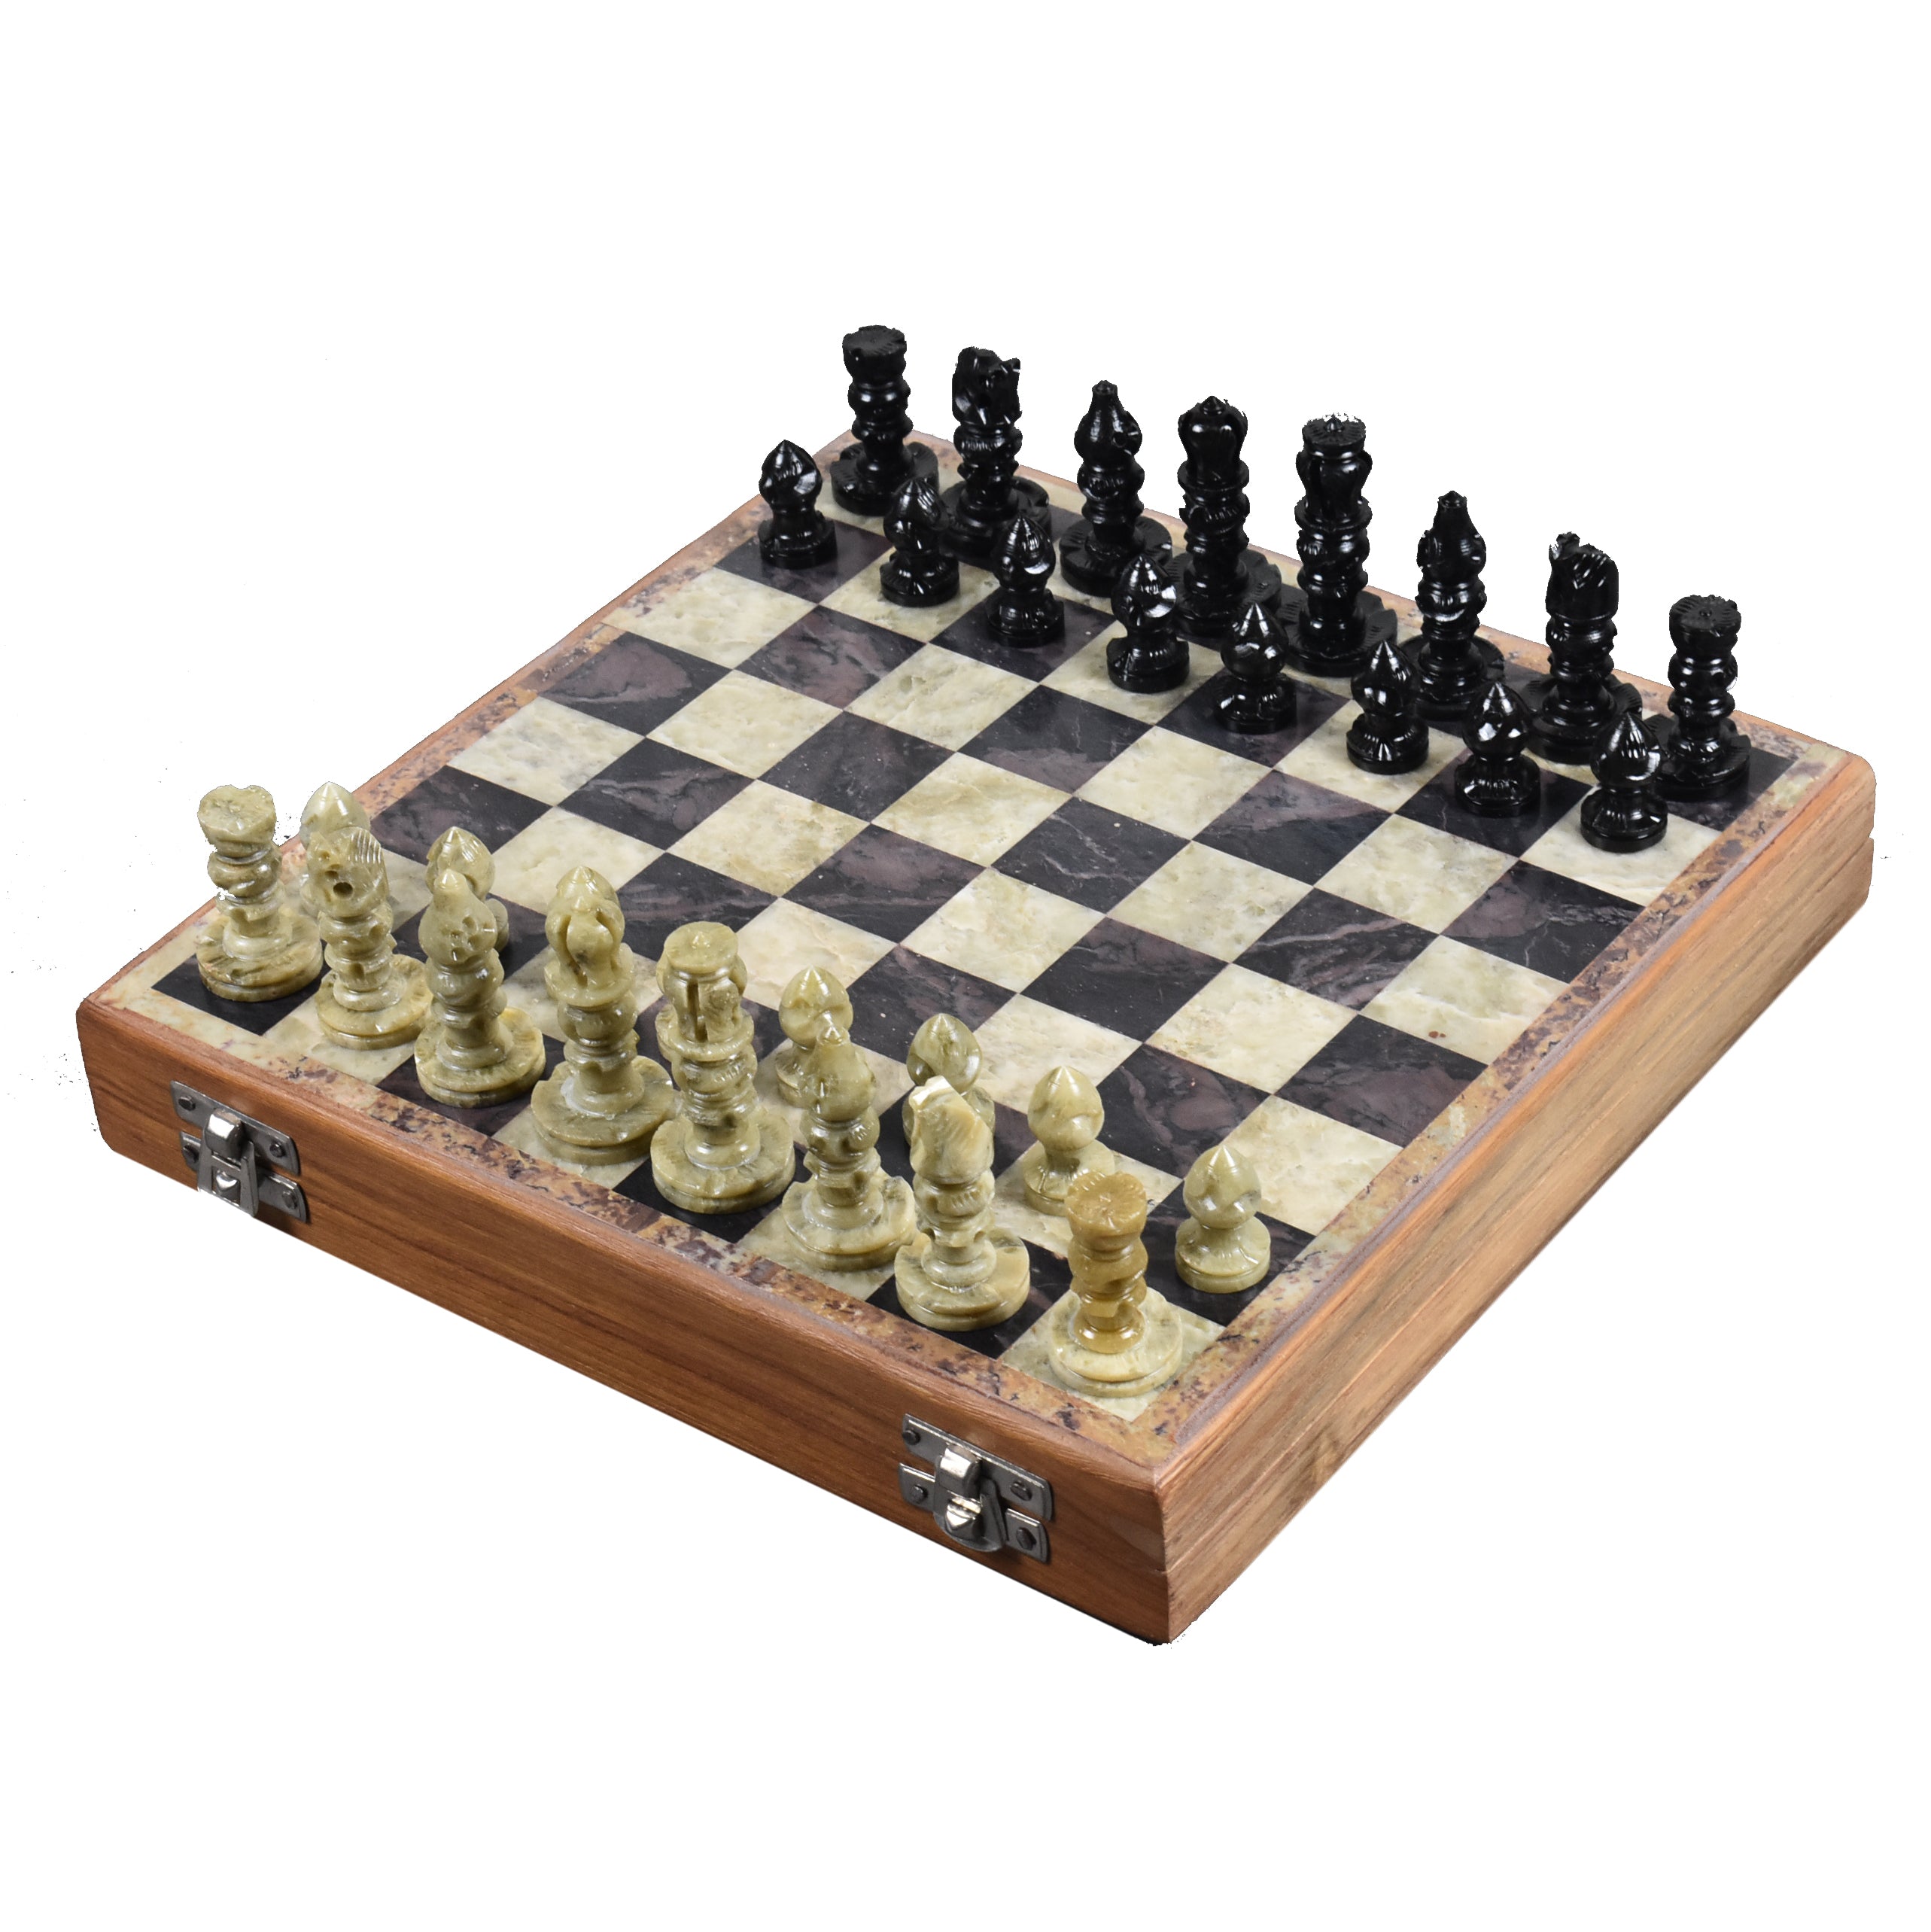 Buy Handcrafted Chess Pieces Sets & Boards at Royal Chess Mall